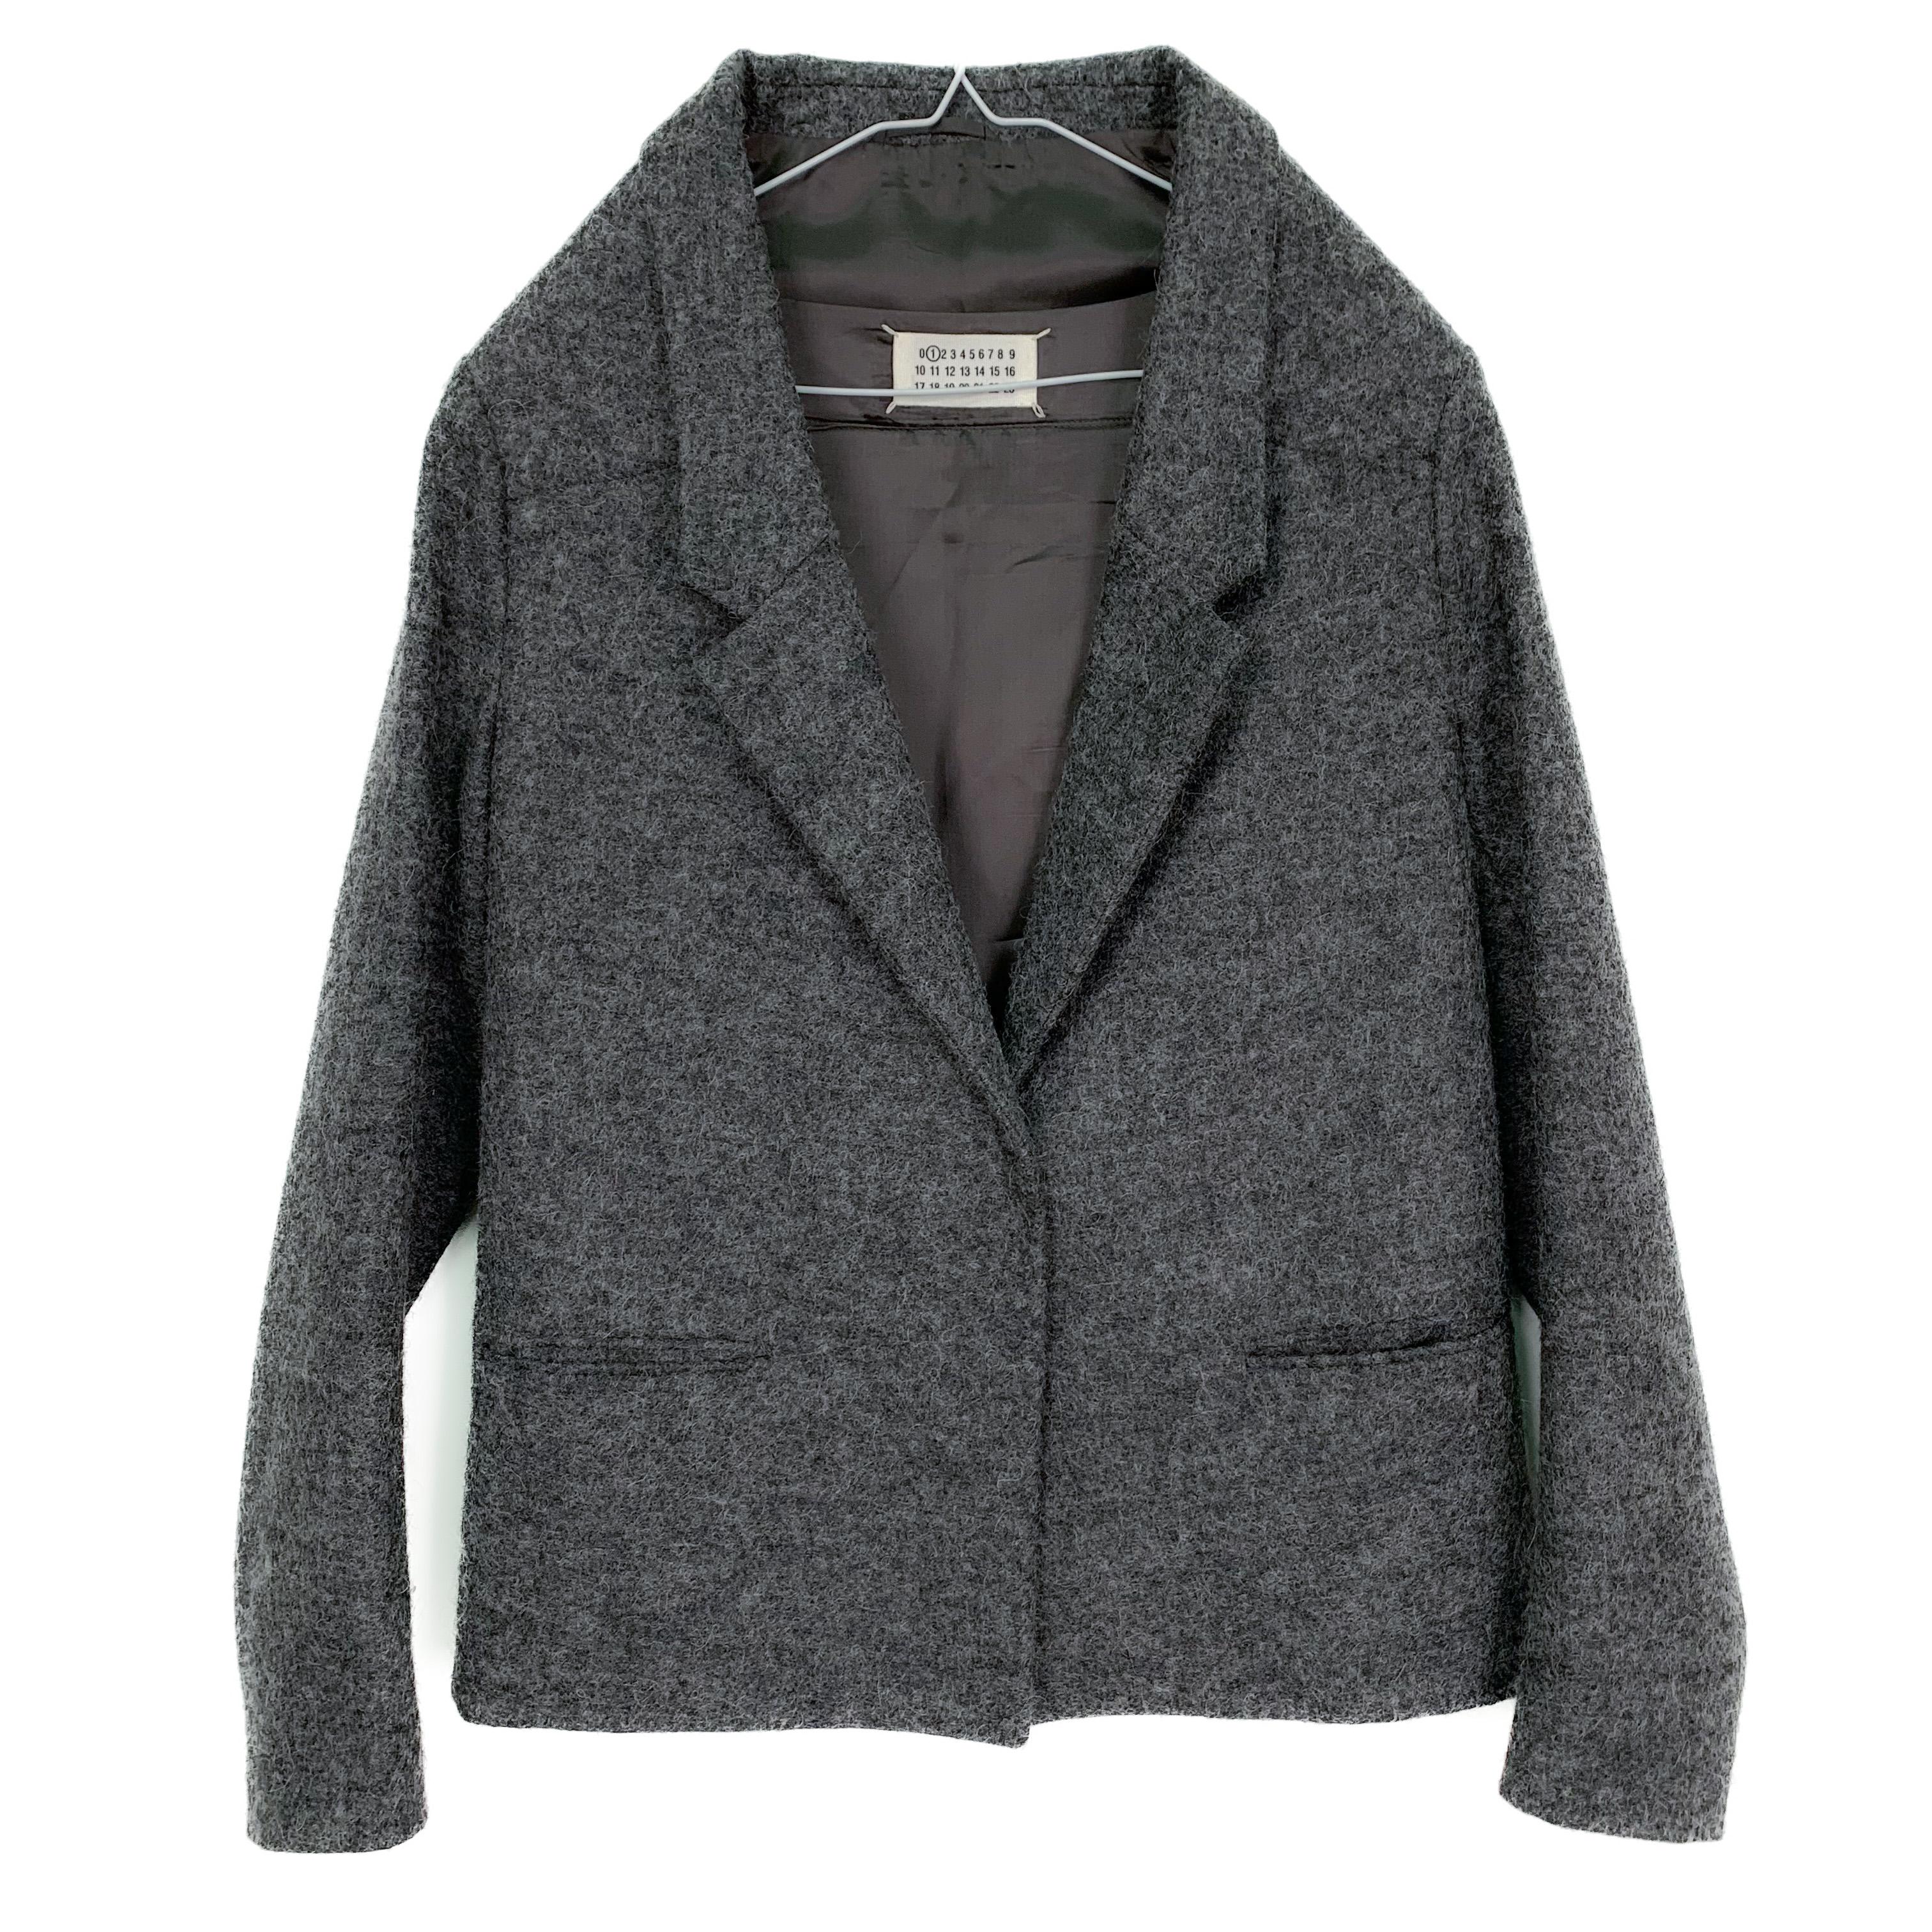 AW 2010 mr. Margiela's last RTW collection grey wool deconstructed blazer For Sale 6